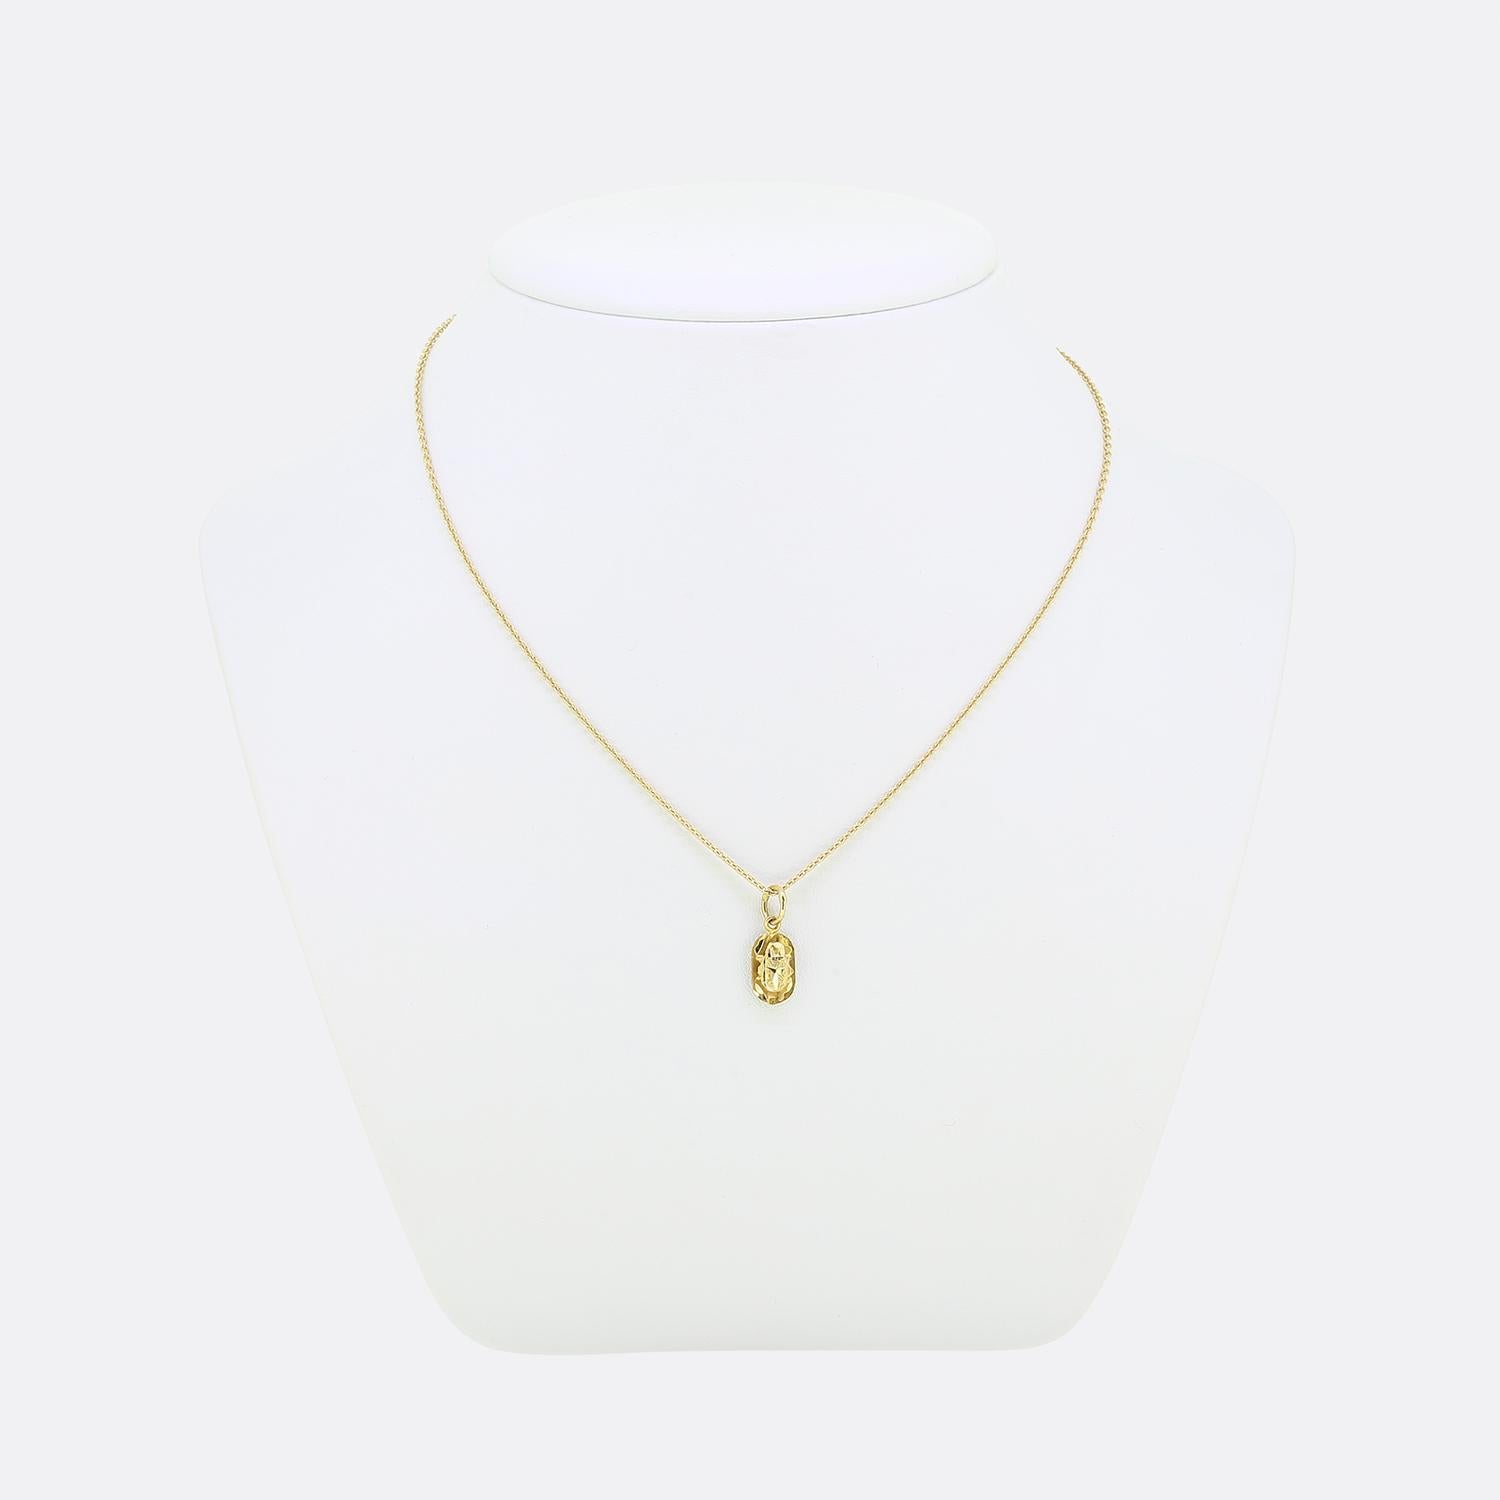 Here we have an wonderful pendant necklace crafted from 18ct yellow gold into the shape of an Egyptian scarab. Scarabs are beetle-shaped amulets which were widely popular throughout ancient Egypt. Modern cinema in Western society has come to